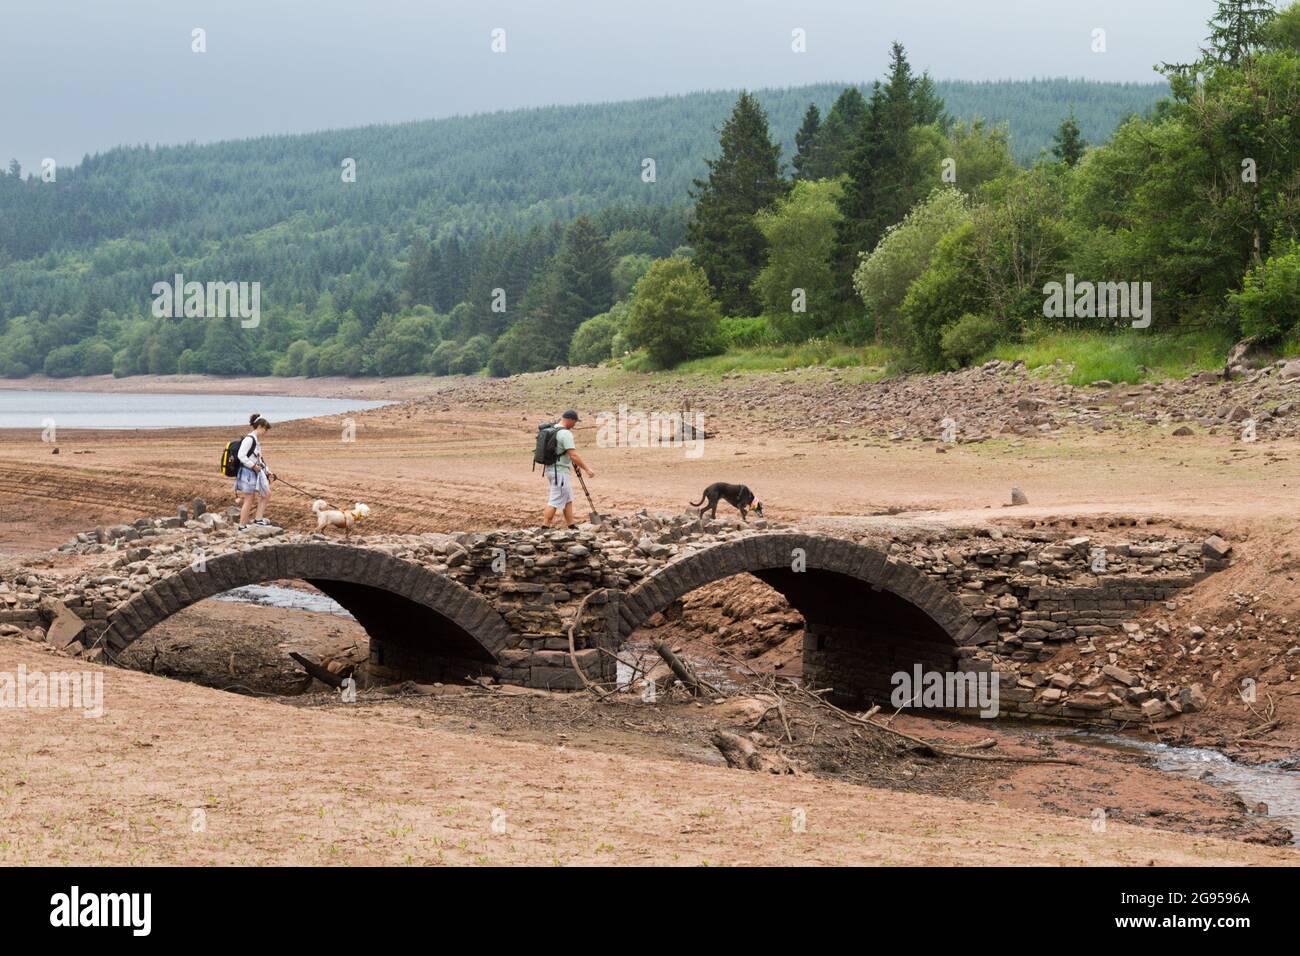 UK weather: Llwyn Onn reservoir, Merthyr Tydfil, South Wales.  24 July 2021.  Water levels continue to deplete after the heatwave.  Credit: Andrew Bartlett/Alamy Live News. Stock Photo